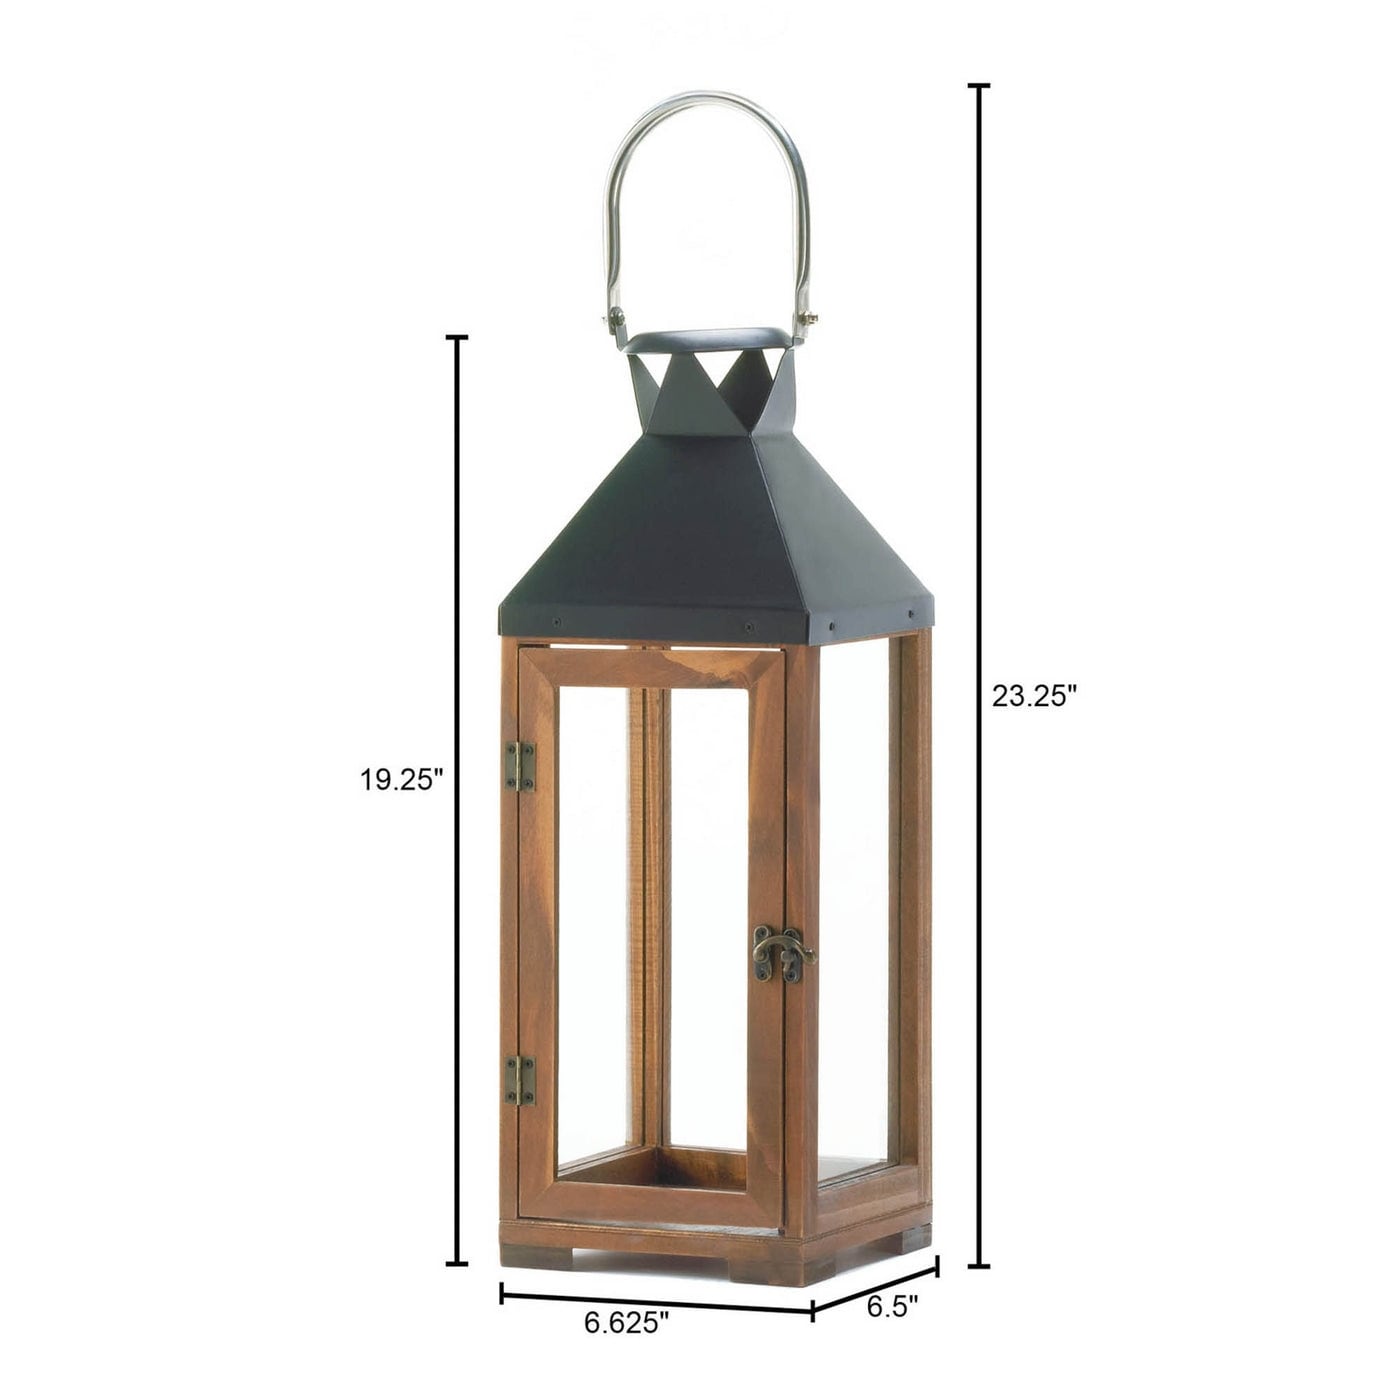 https://ak1.ostkcdn.com/images/products/is/images/direct/d8ff8fda180d965d85f9f3cd3a8f7db8fd72d24e/Hartford-Large-Candle-Lantern.jpg